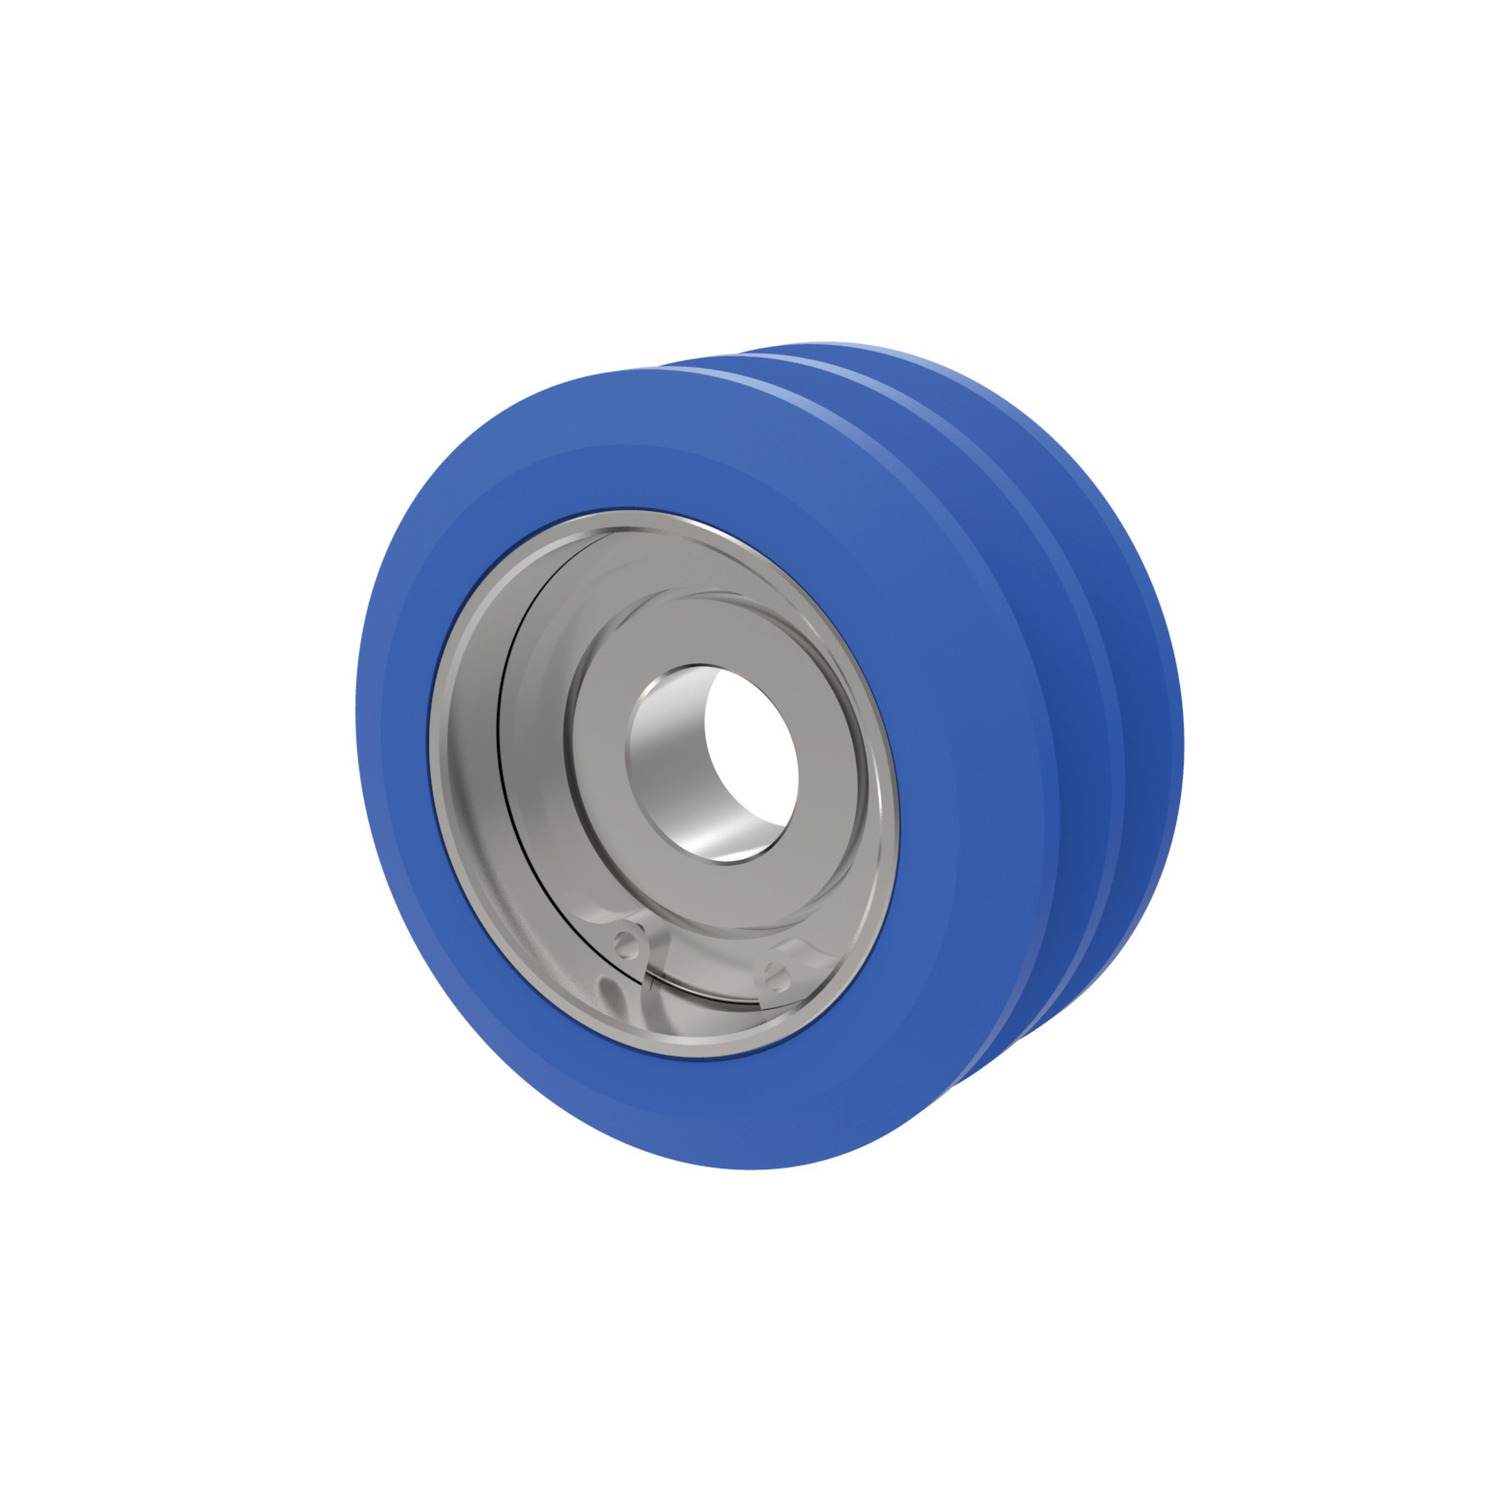 Finned Roller Widely used for material and component handling.  Ranging from 2 to 4 inches in diameter. Suitable for applications where part protection and appearance are critical. Debris or liquid settles in fine grooves away from contact surface with components.